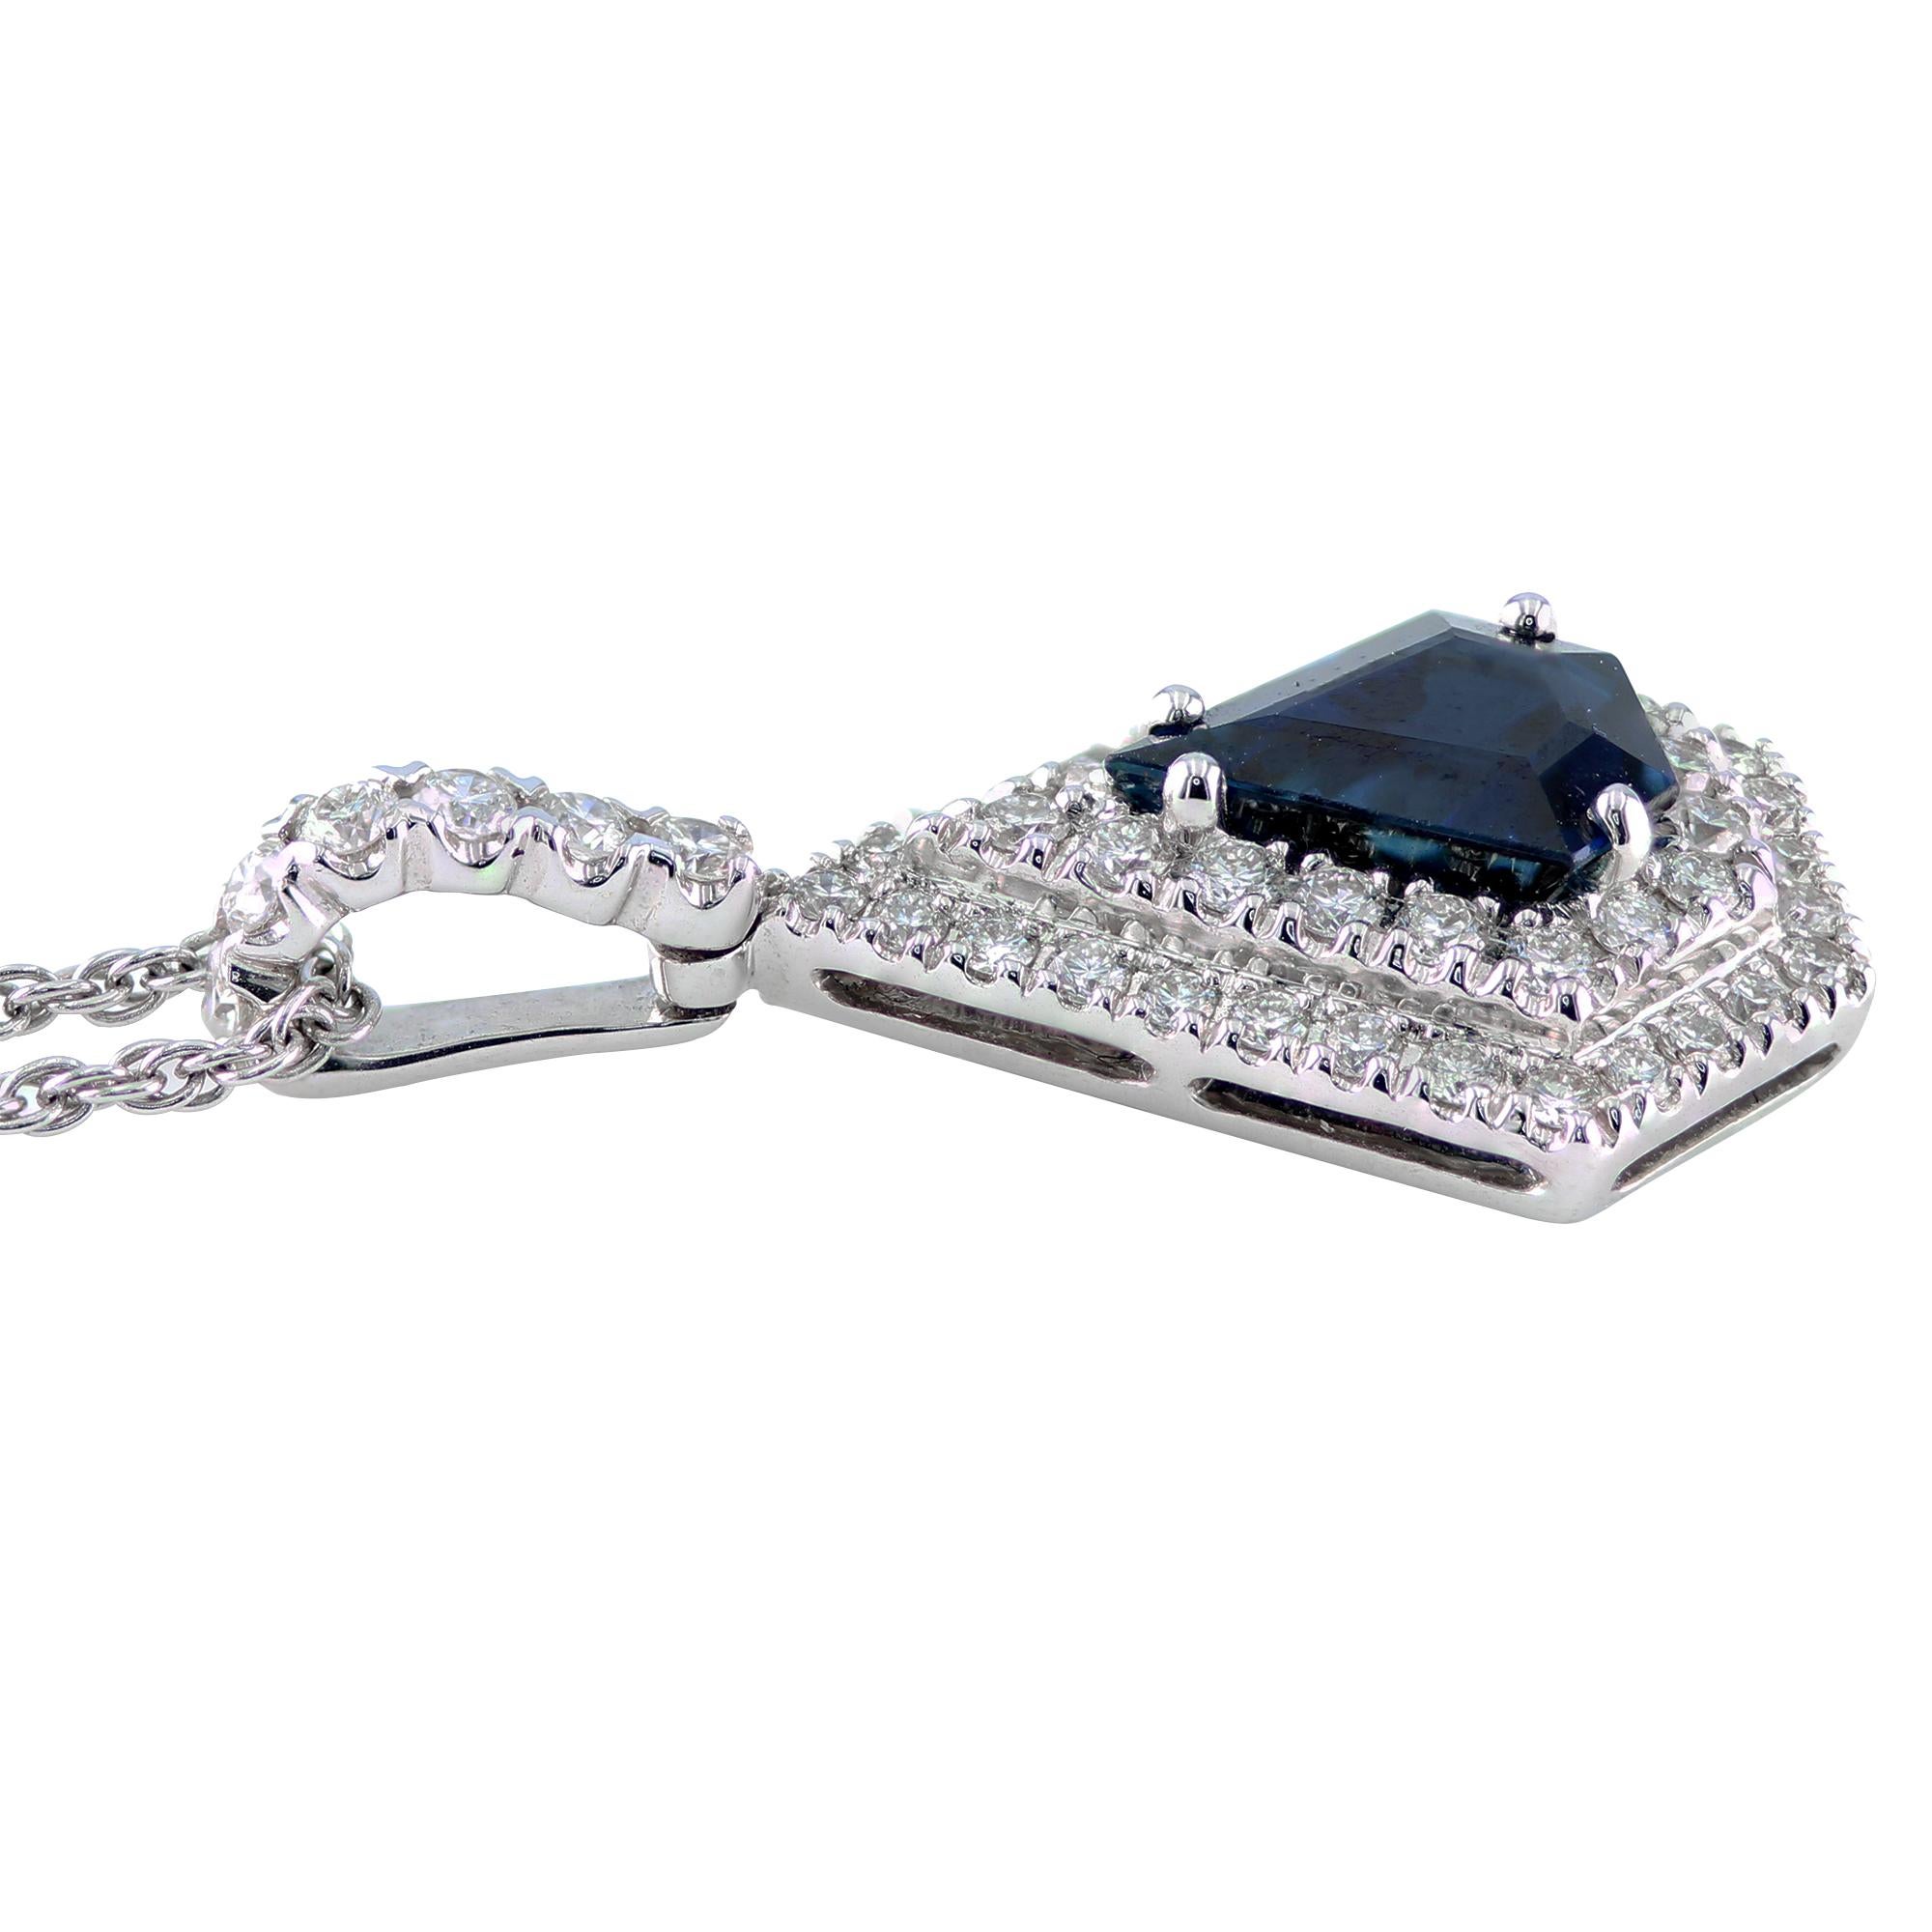 1.76 carat Kite-Shape Sapphire pendant, surrounded by 0.62 carat round diamonds, set in 18K.

Elegant pendant, that is sure to be an eye catching accessory to set a fun and classy mood at any occasion. 

18 inch long chain.